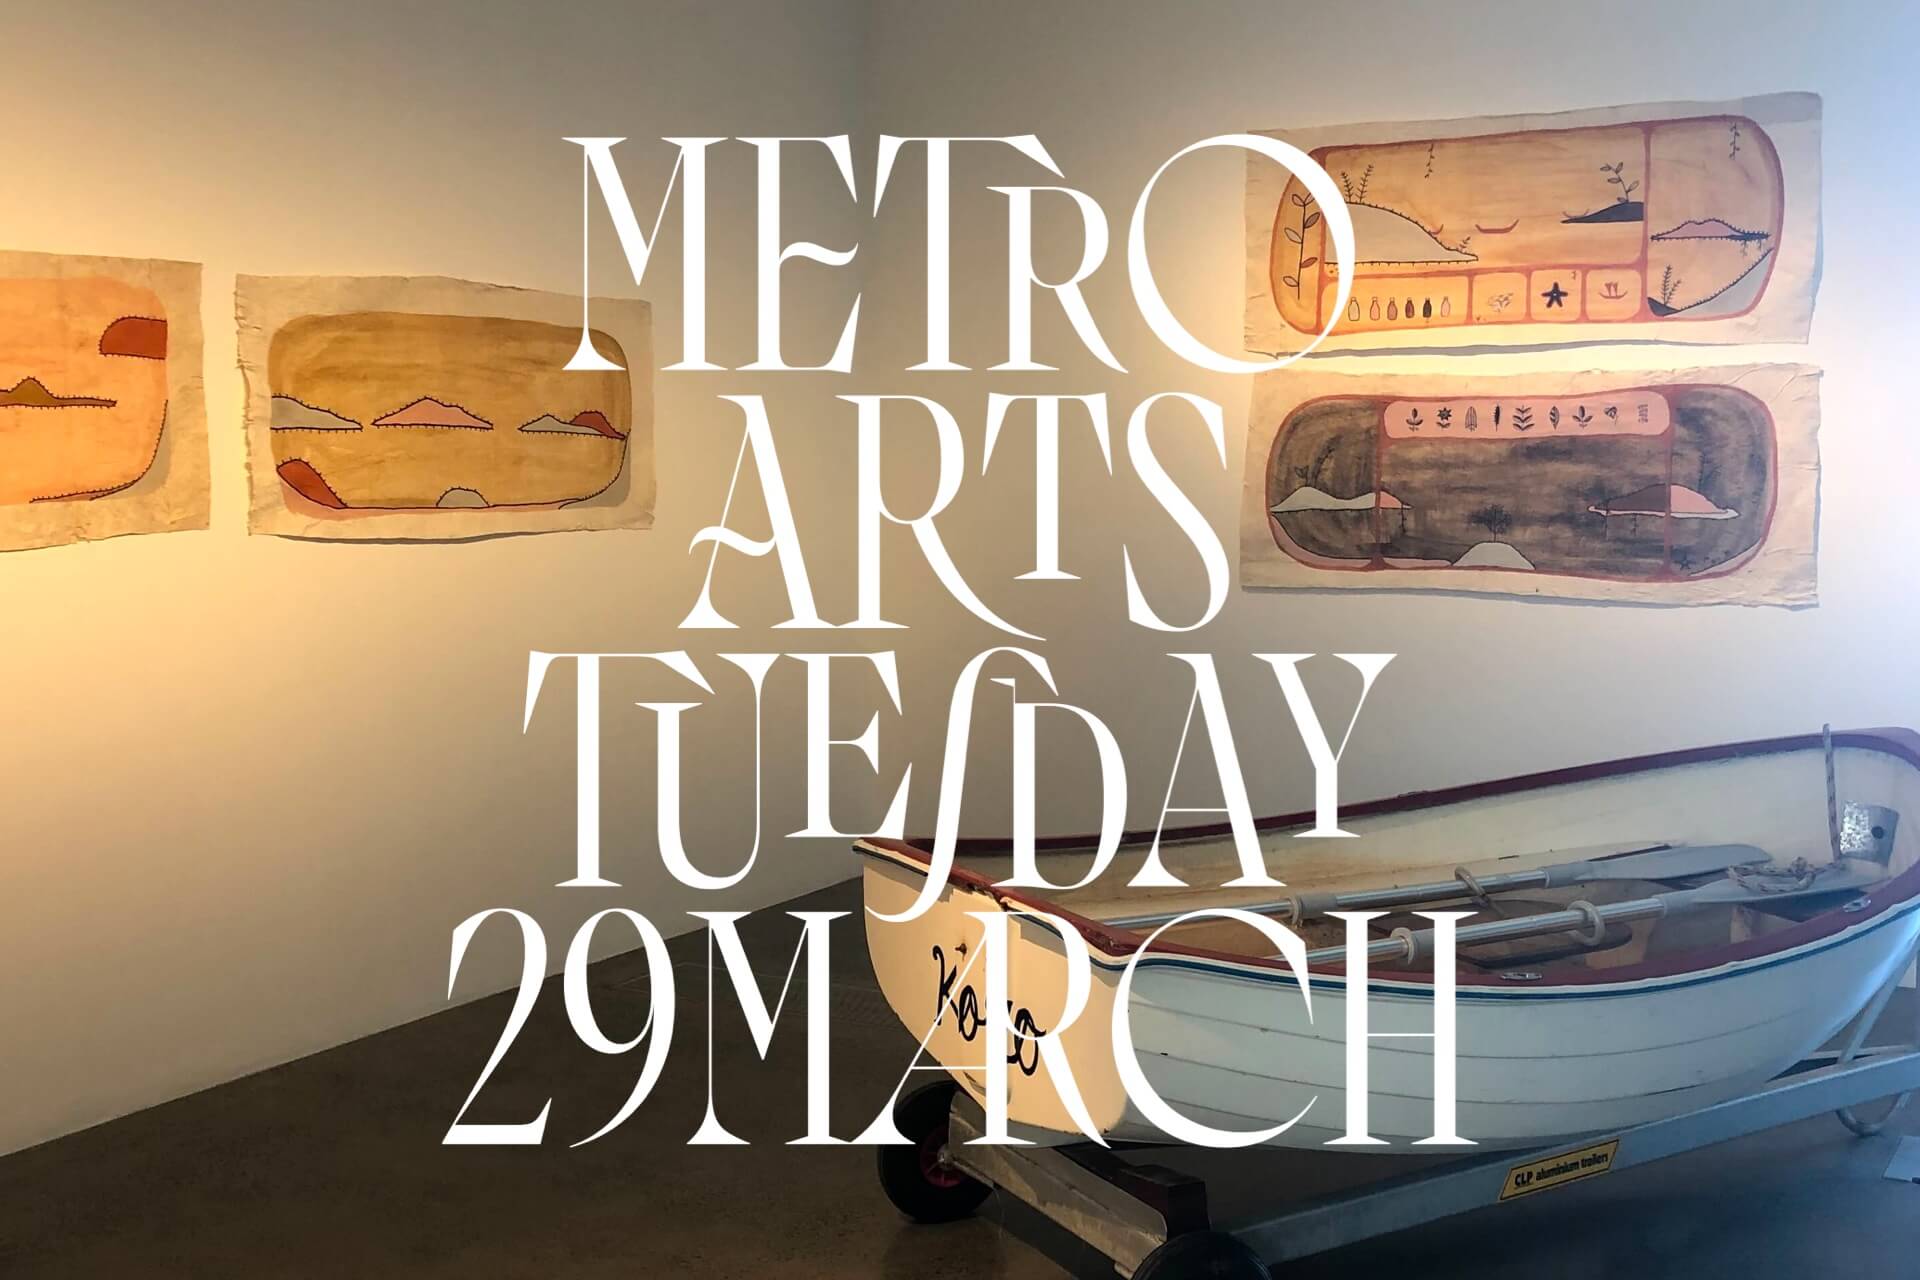 Metro Arts — Tuesday 29 March